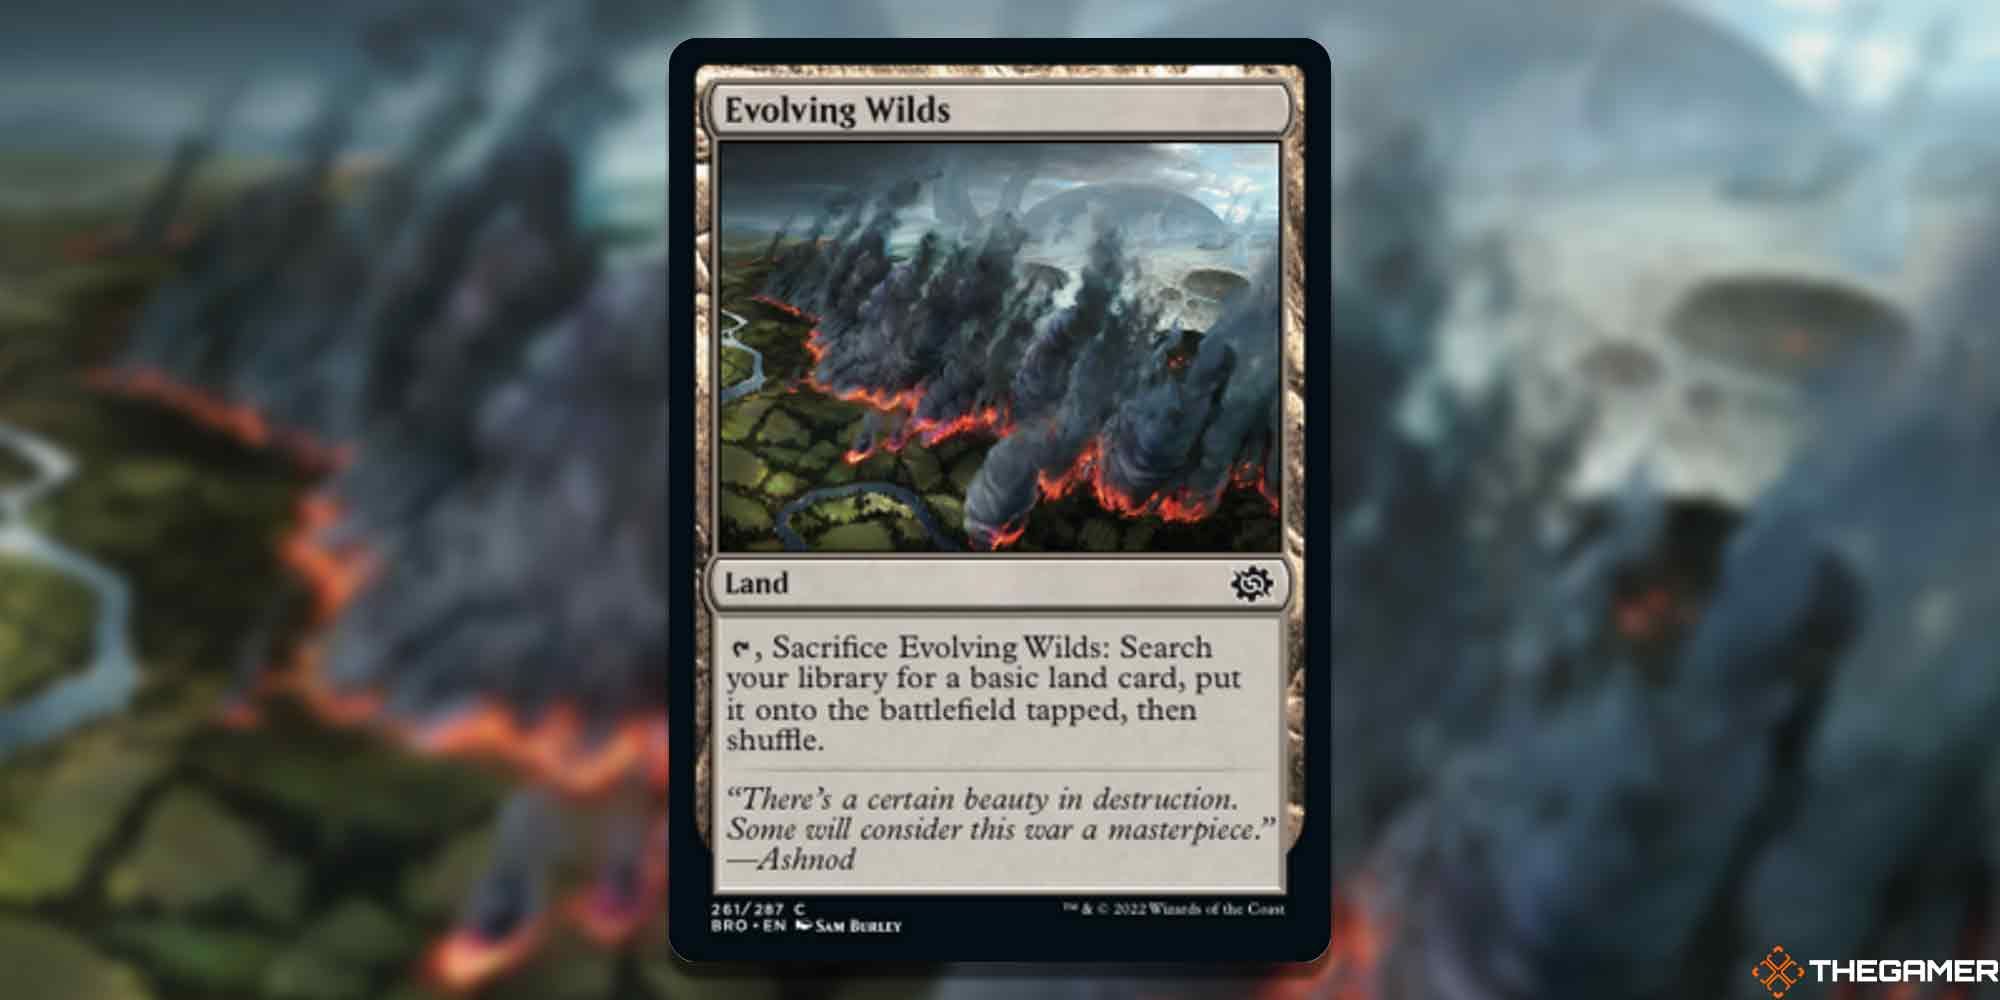 Image of the MTG Evolving Wilds card with art by Sam Burley